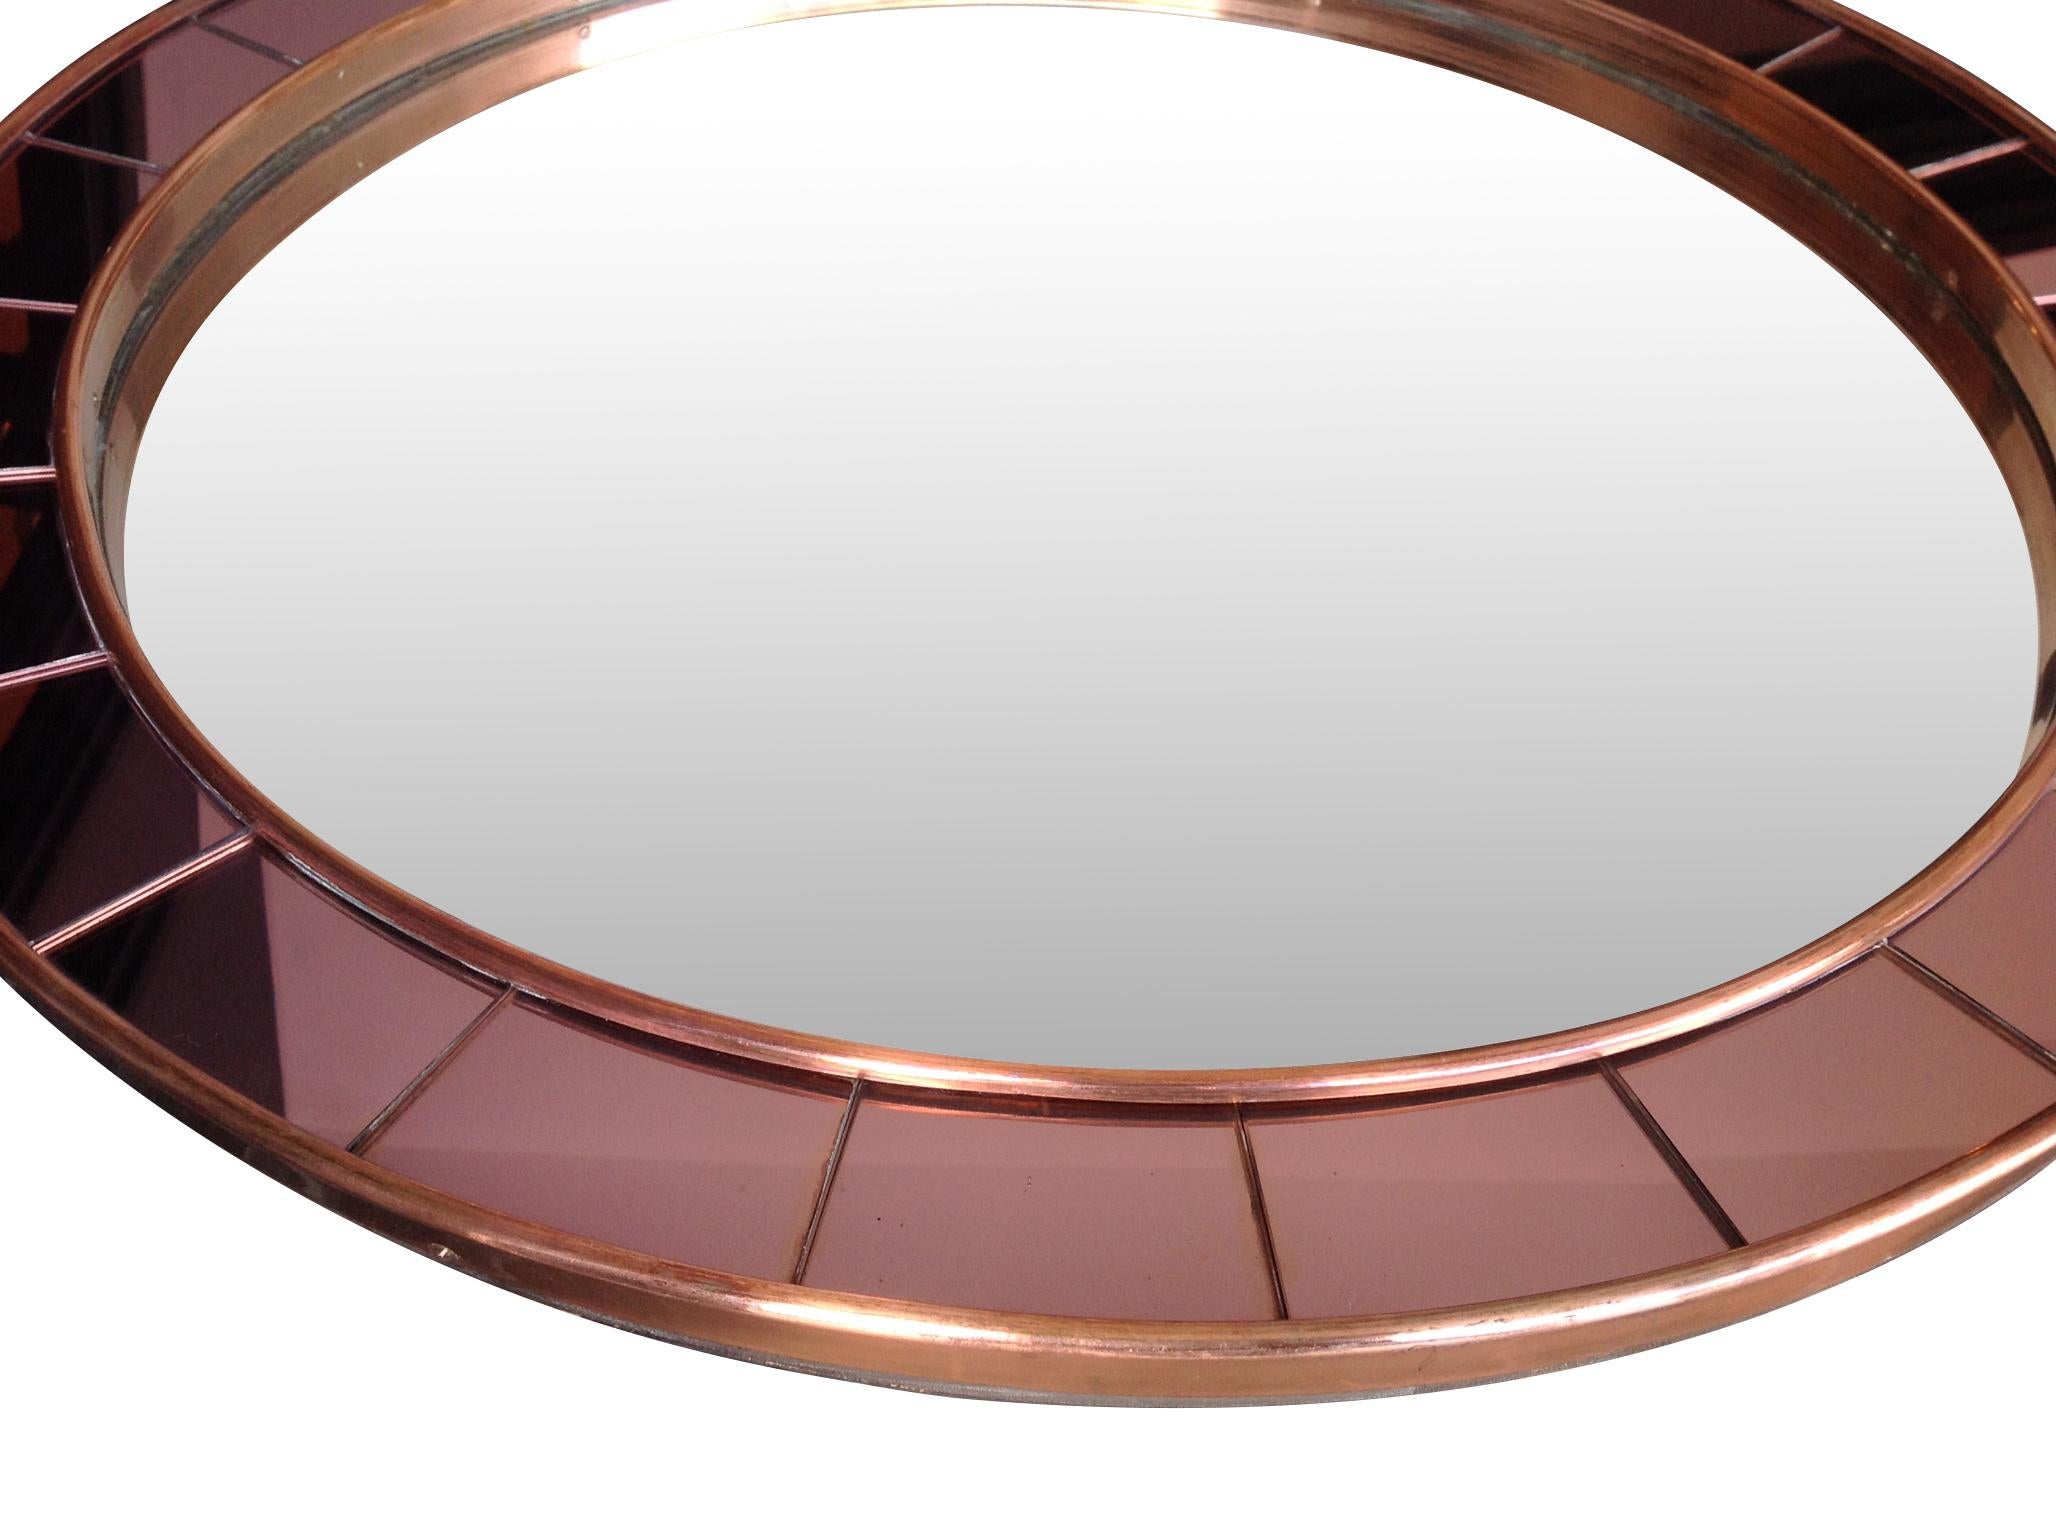 Italian 1950s Cristal Arte Mirror with Rose Mirrored Surround and Copper Frame